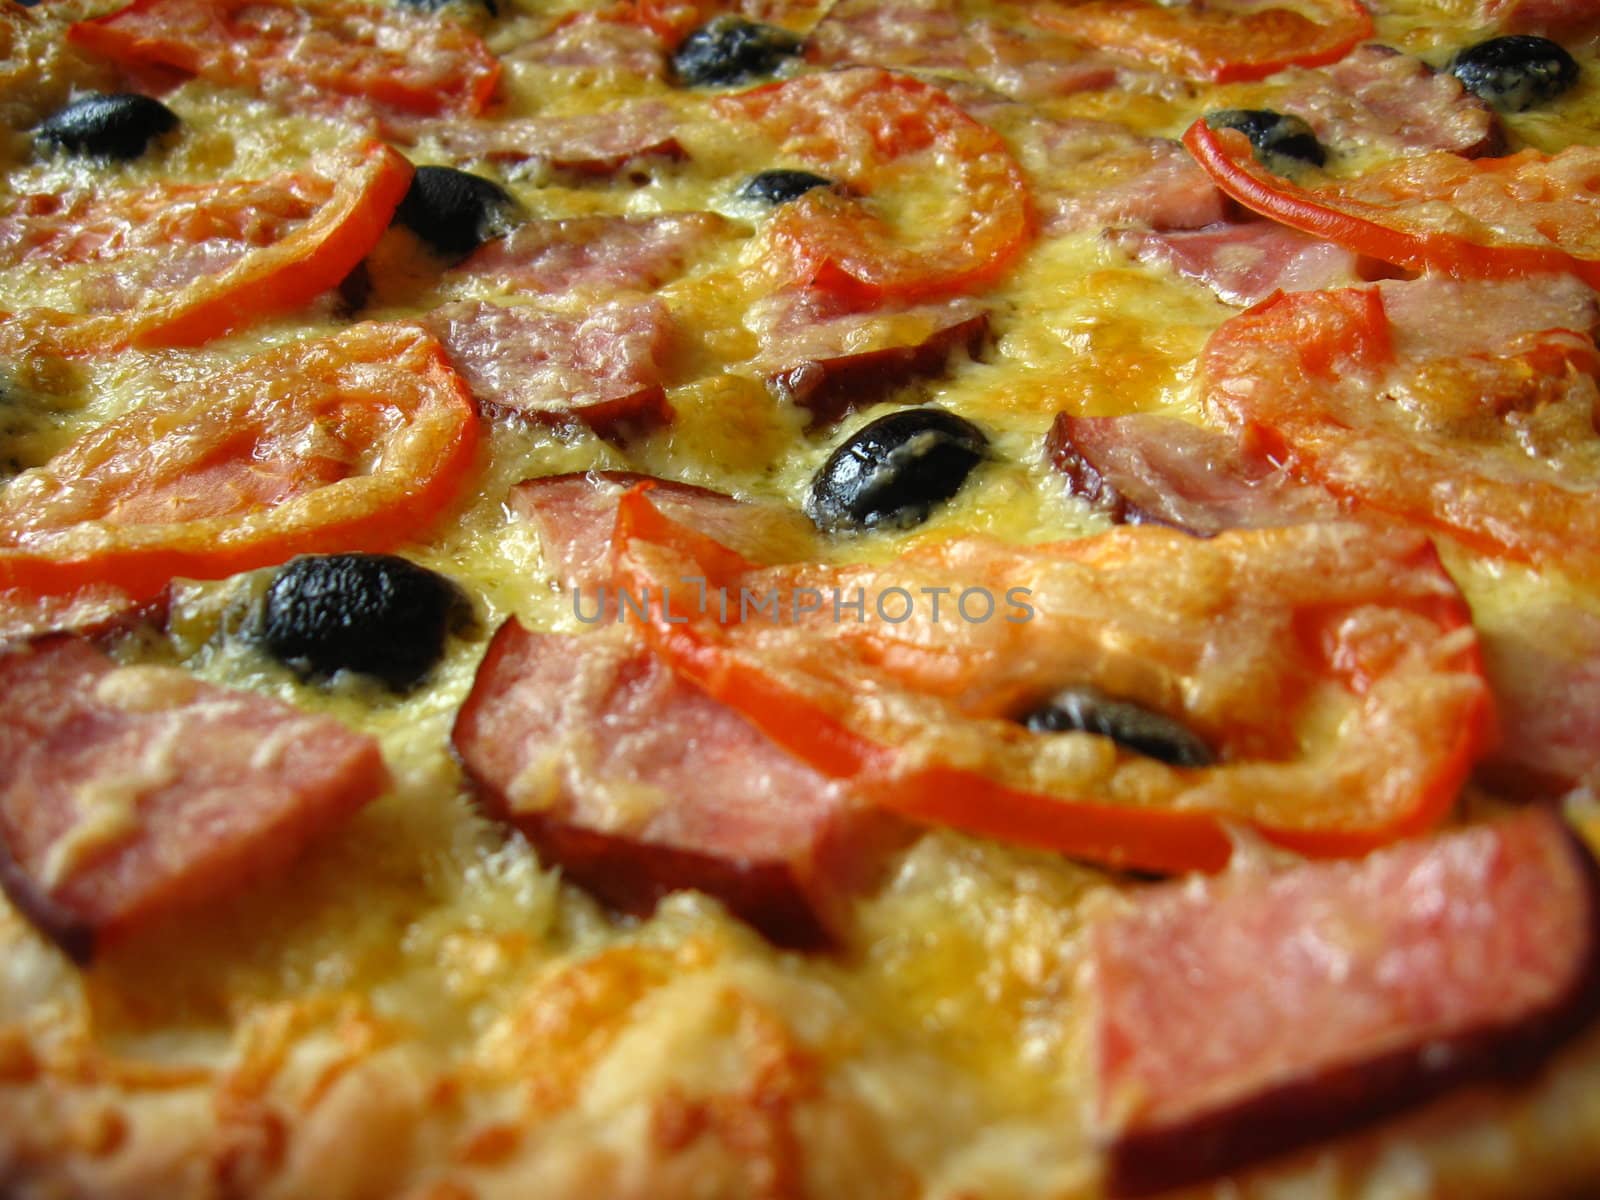 The image of tasty pizza with an appetizing stuffing